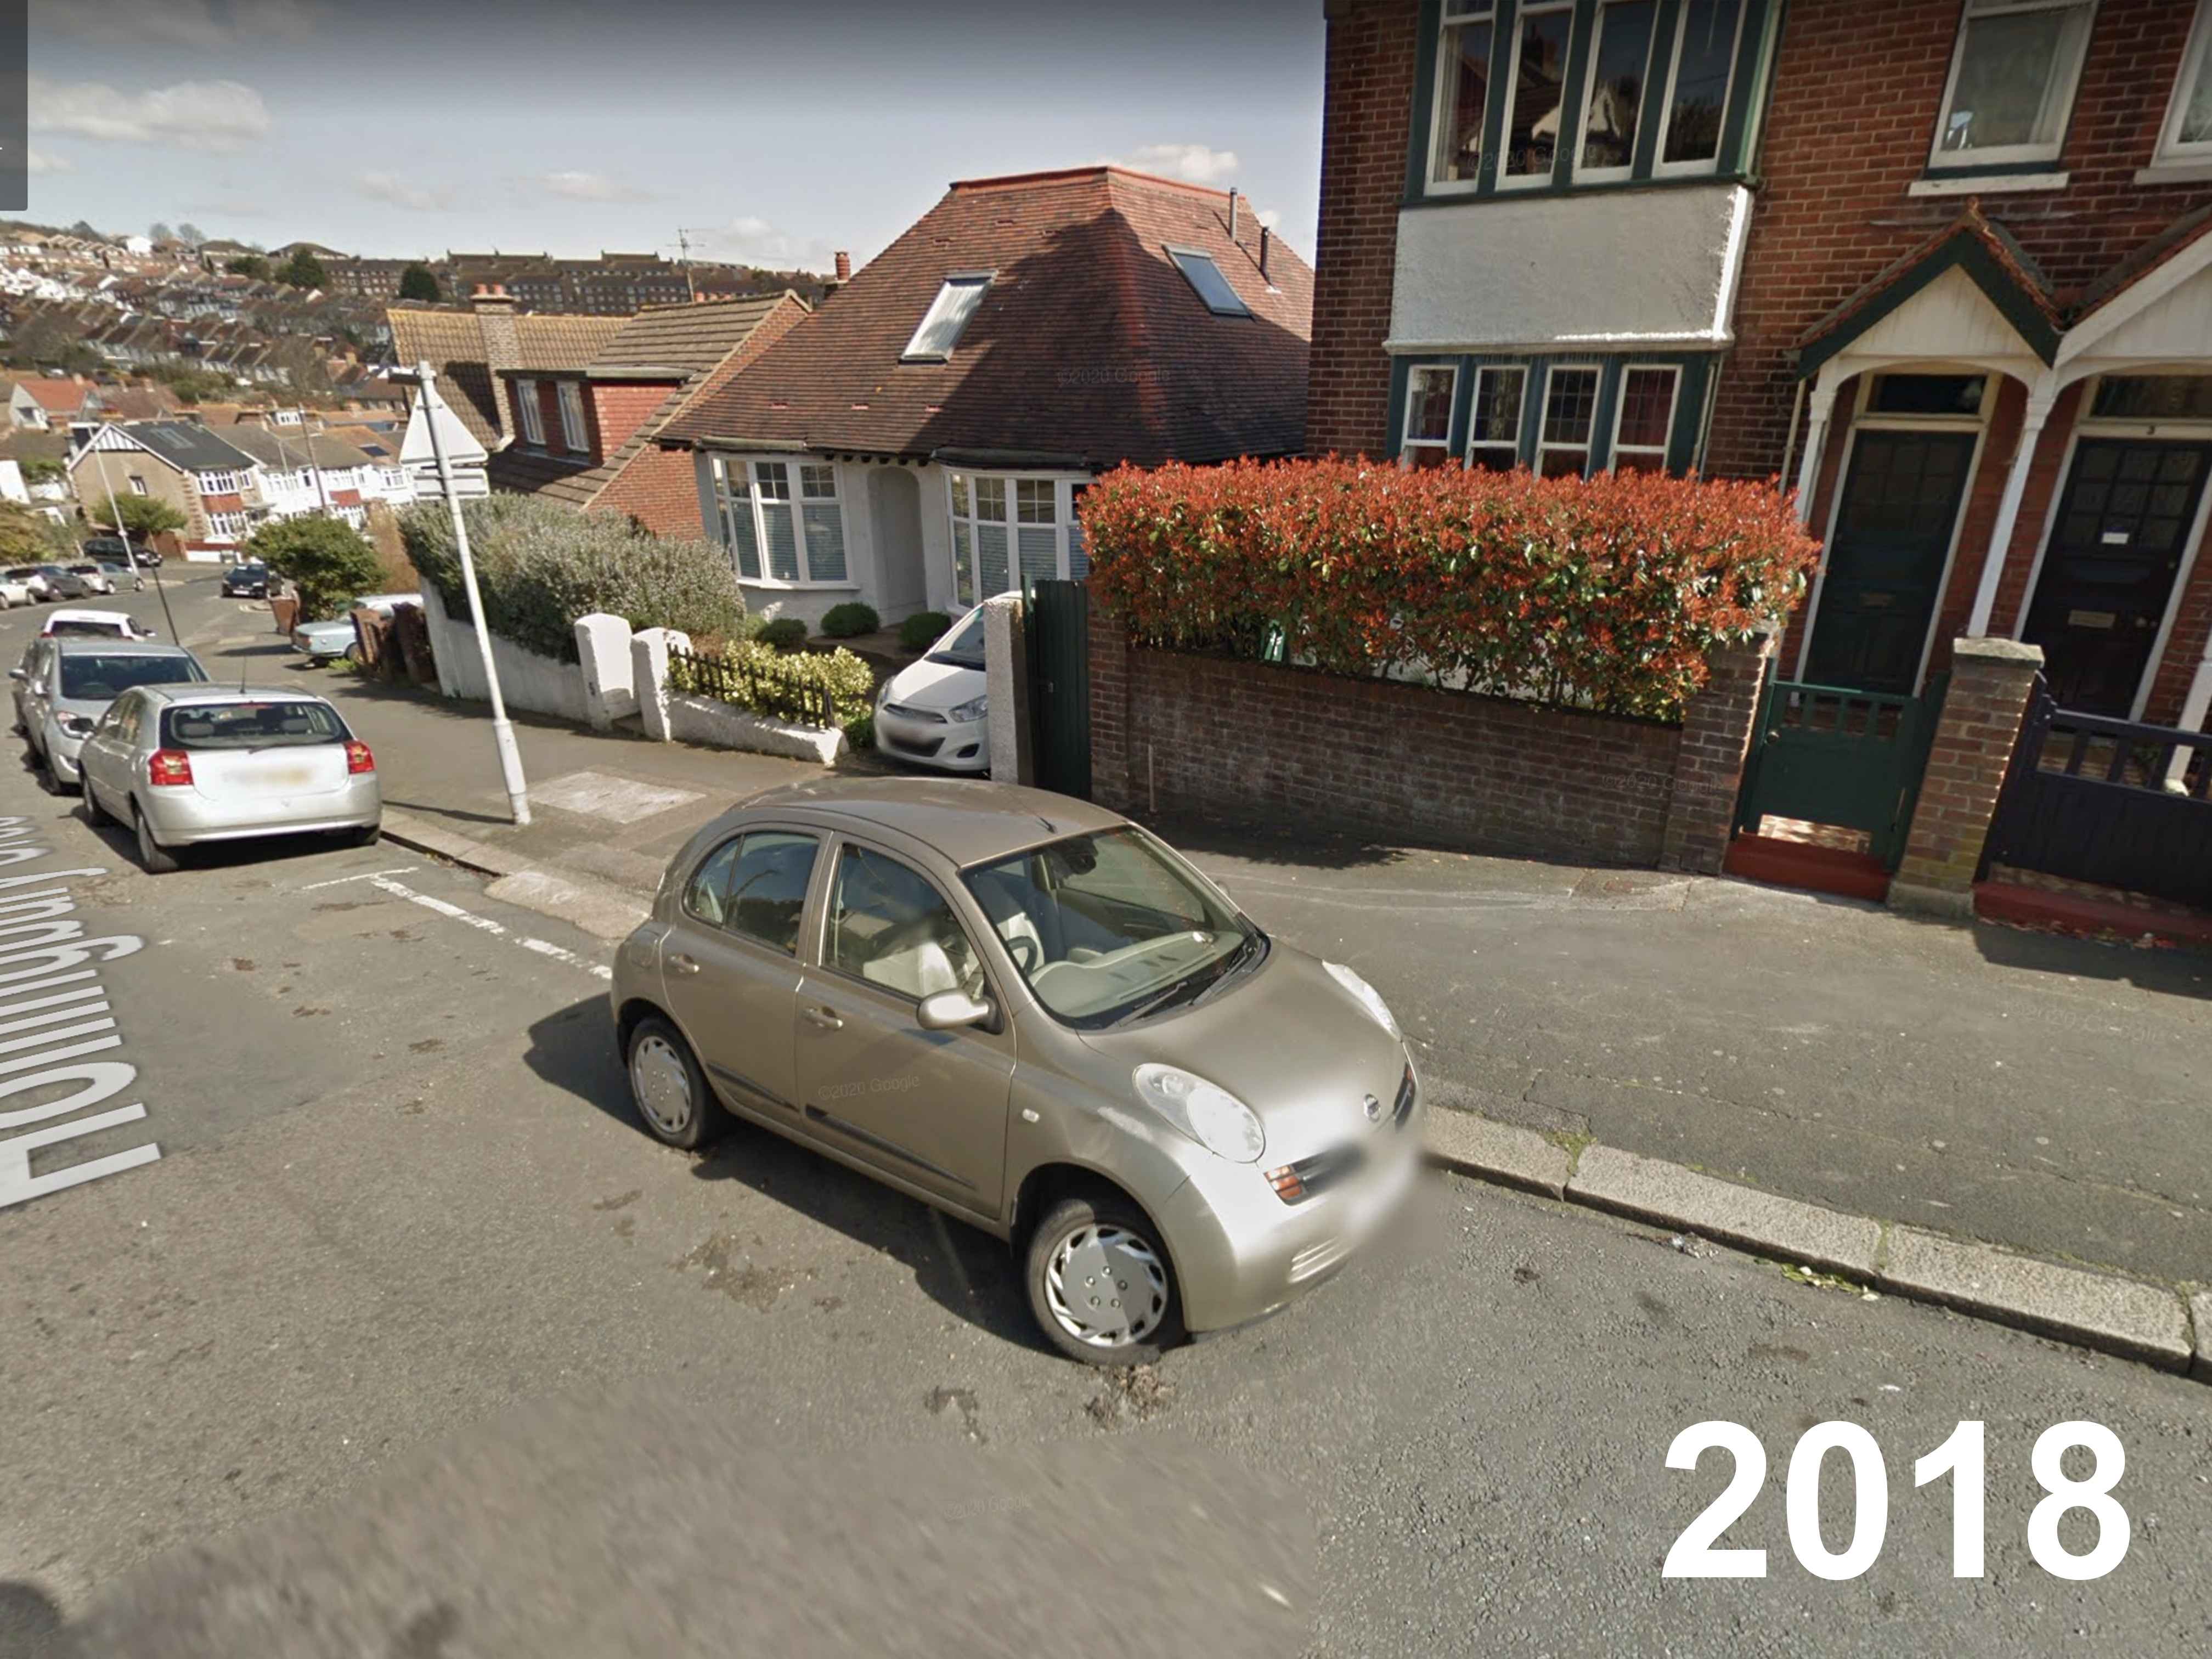 Photograph of LC03 FYJ - a Gold Nissan Micra parked in Hollingdean by a non-resident, and potentially abandoned. The sixteenth of seventeen photographs supplied by the residents of Hollingdean.